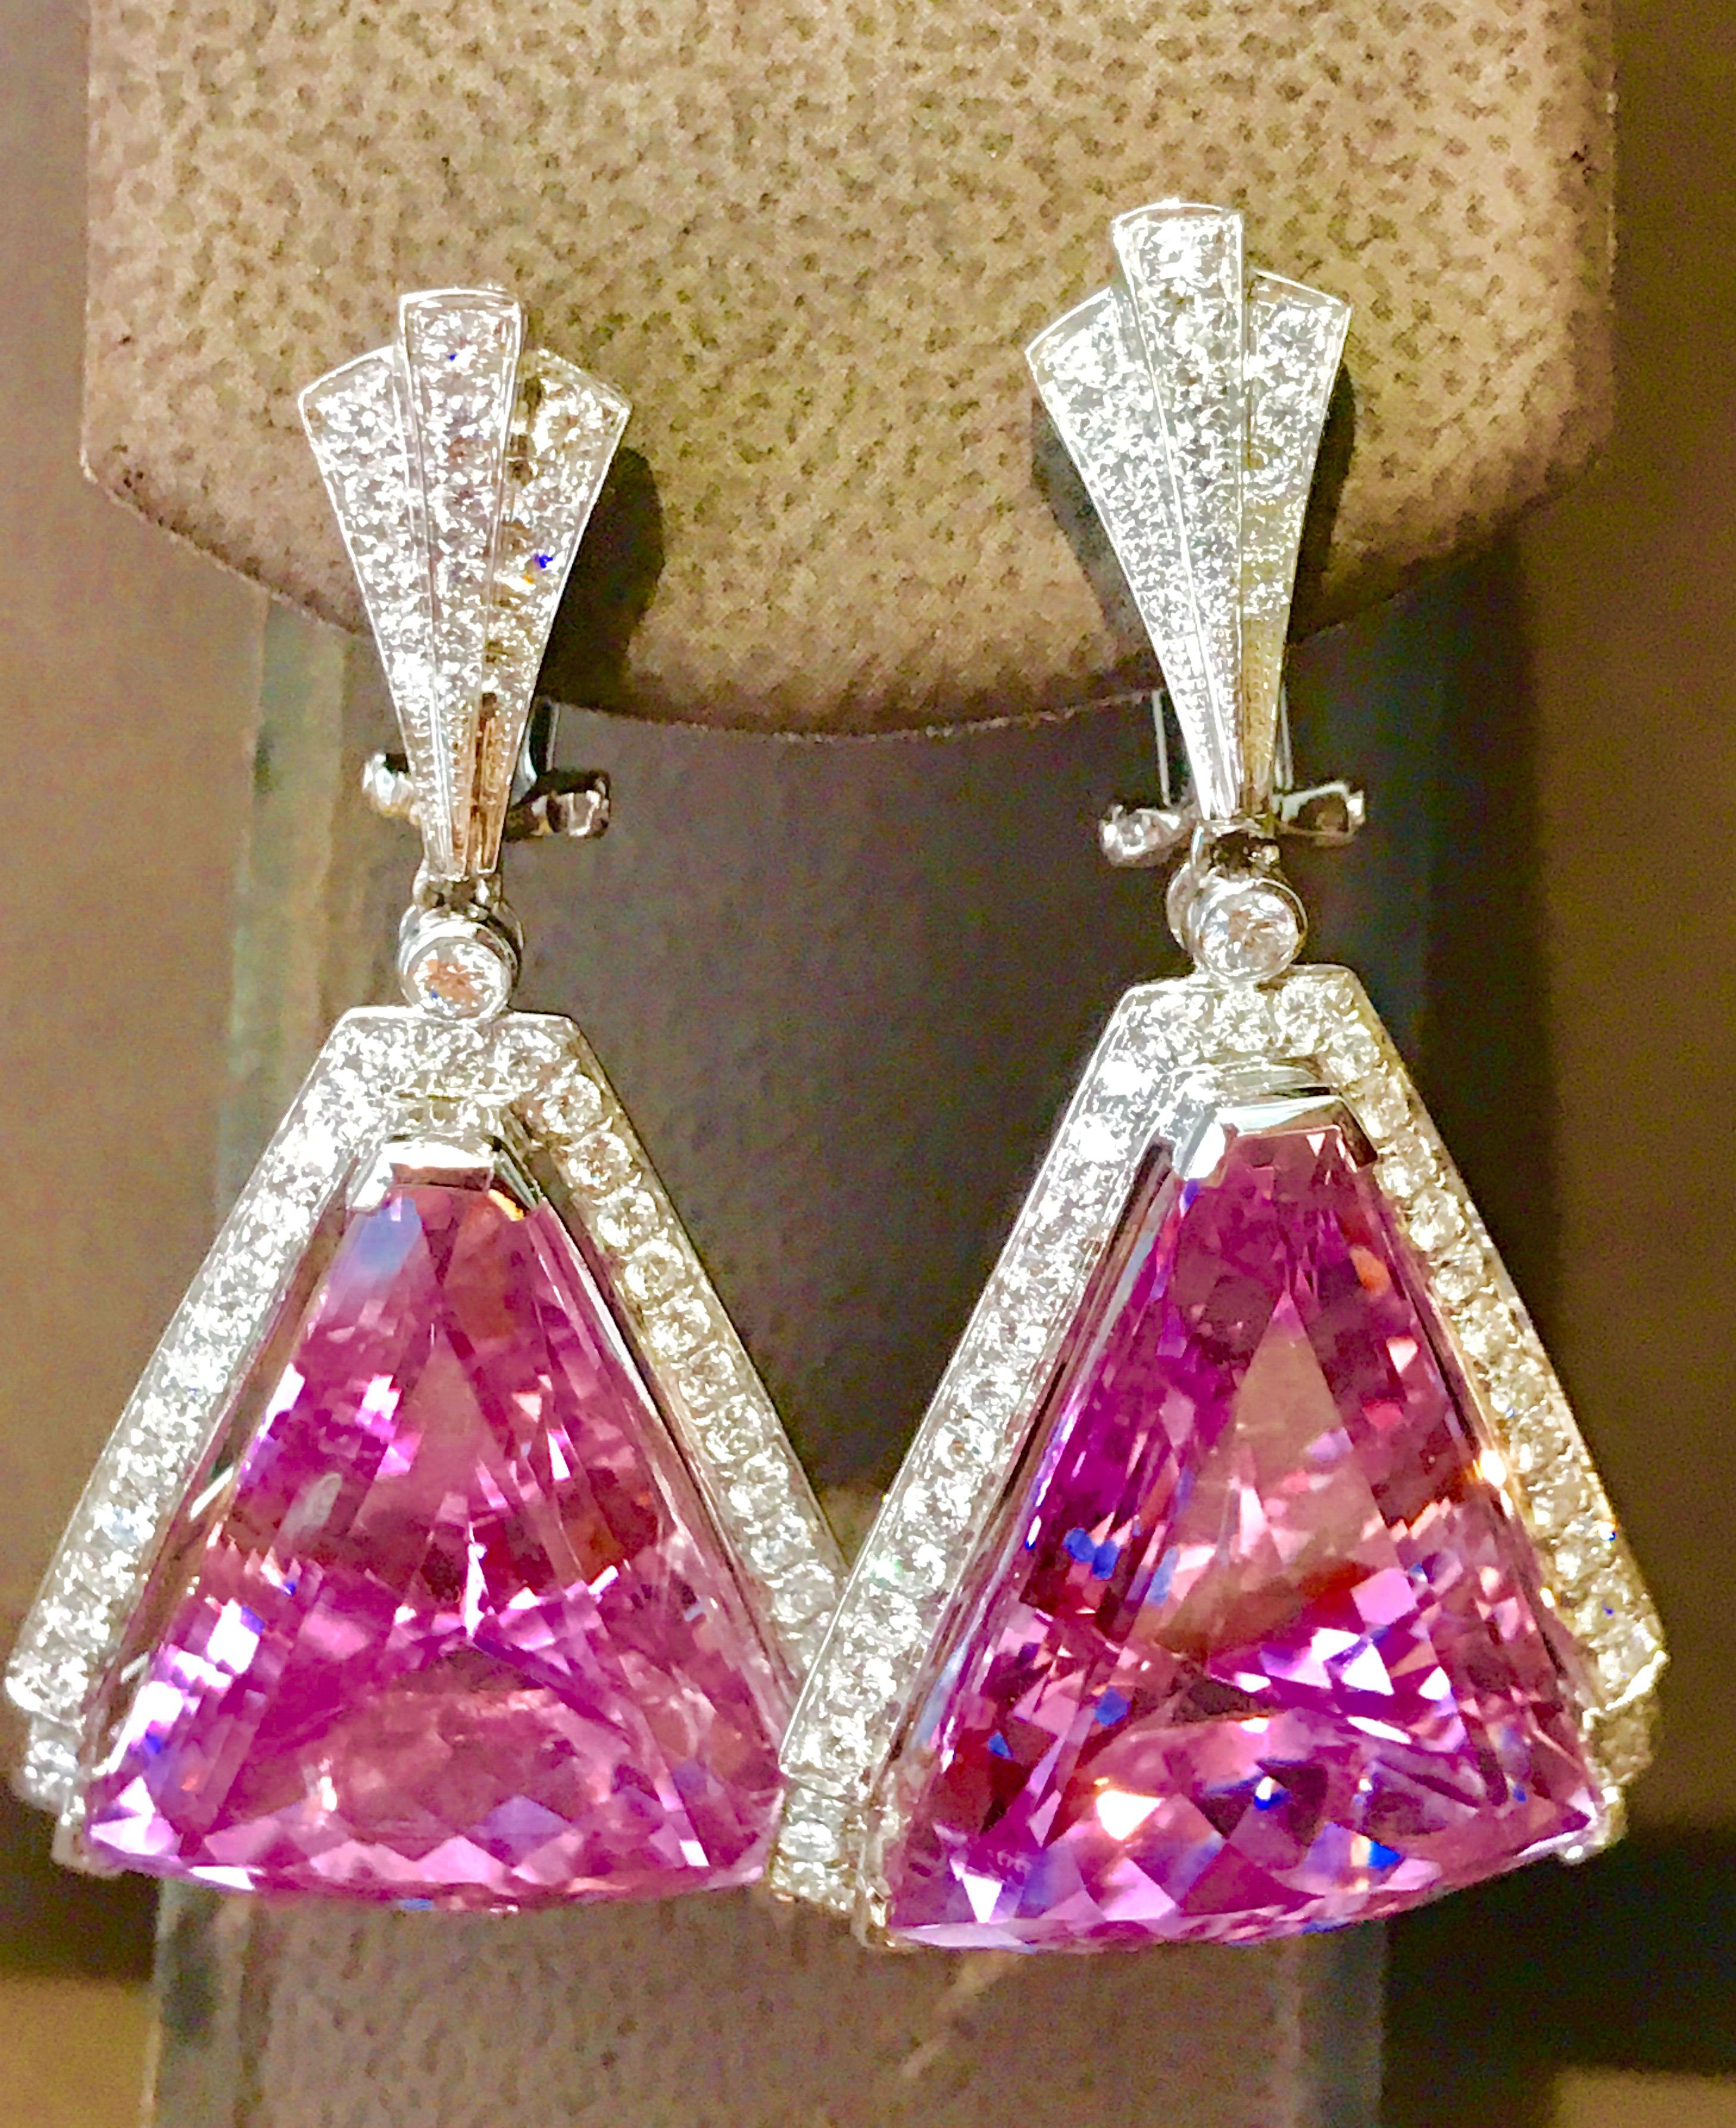  UGL  Certified 76.15 carat  Kunzite and Diamond Earrings, Estate UGL certified # 3282536
Very large  Kunzite Hanging Earrings total weight 77 ct , perfect pair made in  18 carat White  gold 
 Diamonds: approximate 3.78 carat , VS Quality G